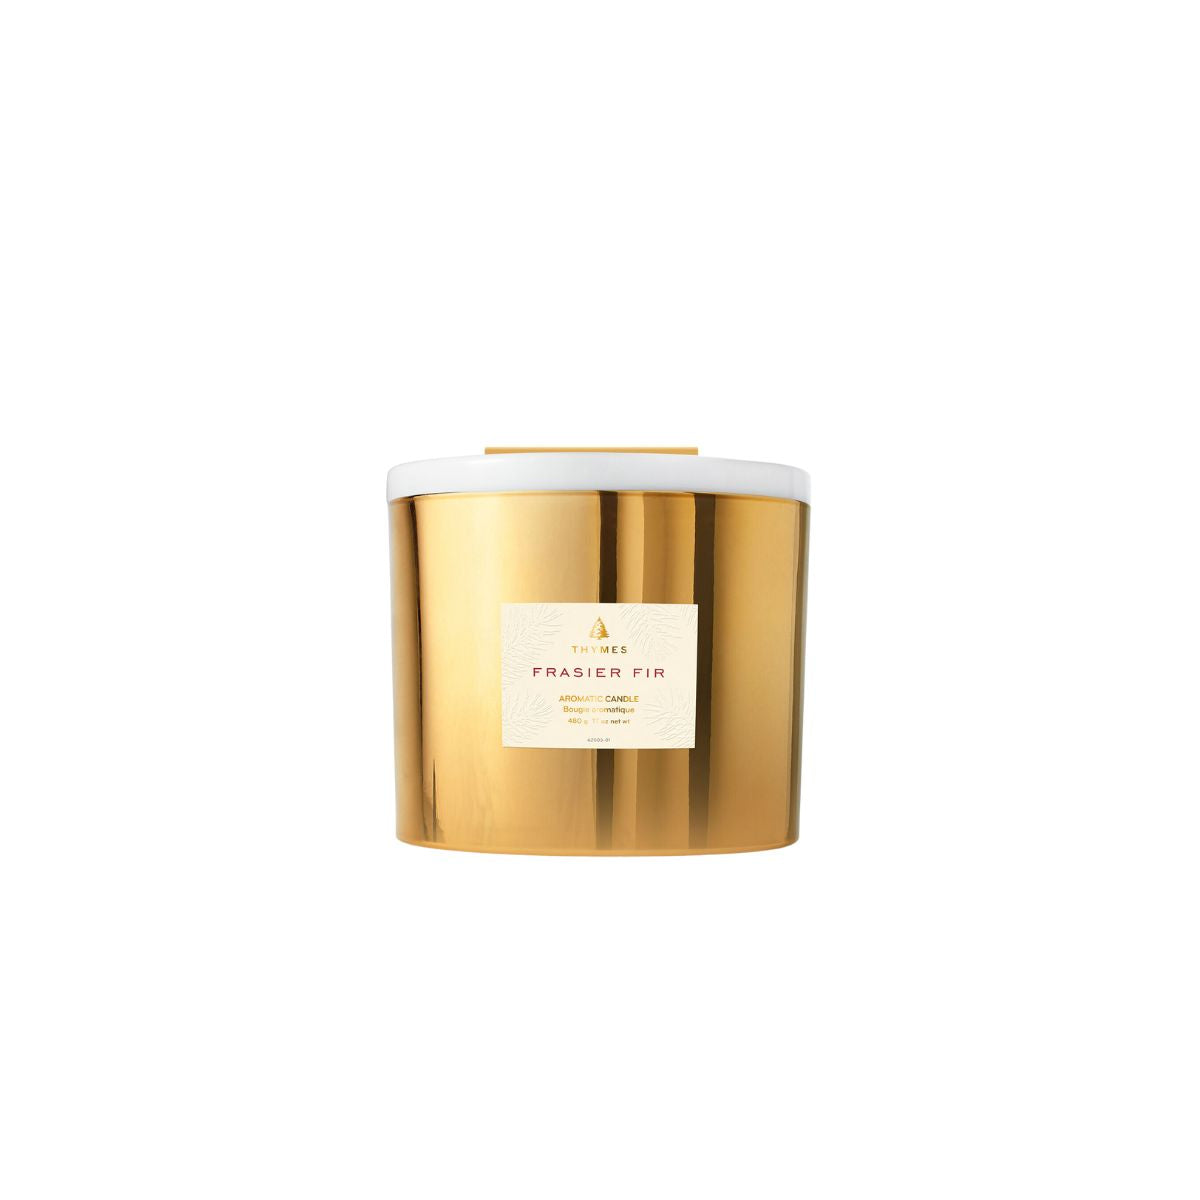 Thymes 3-wick Gold Frasier Fir Gilded Poured Candle (17oz)